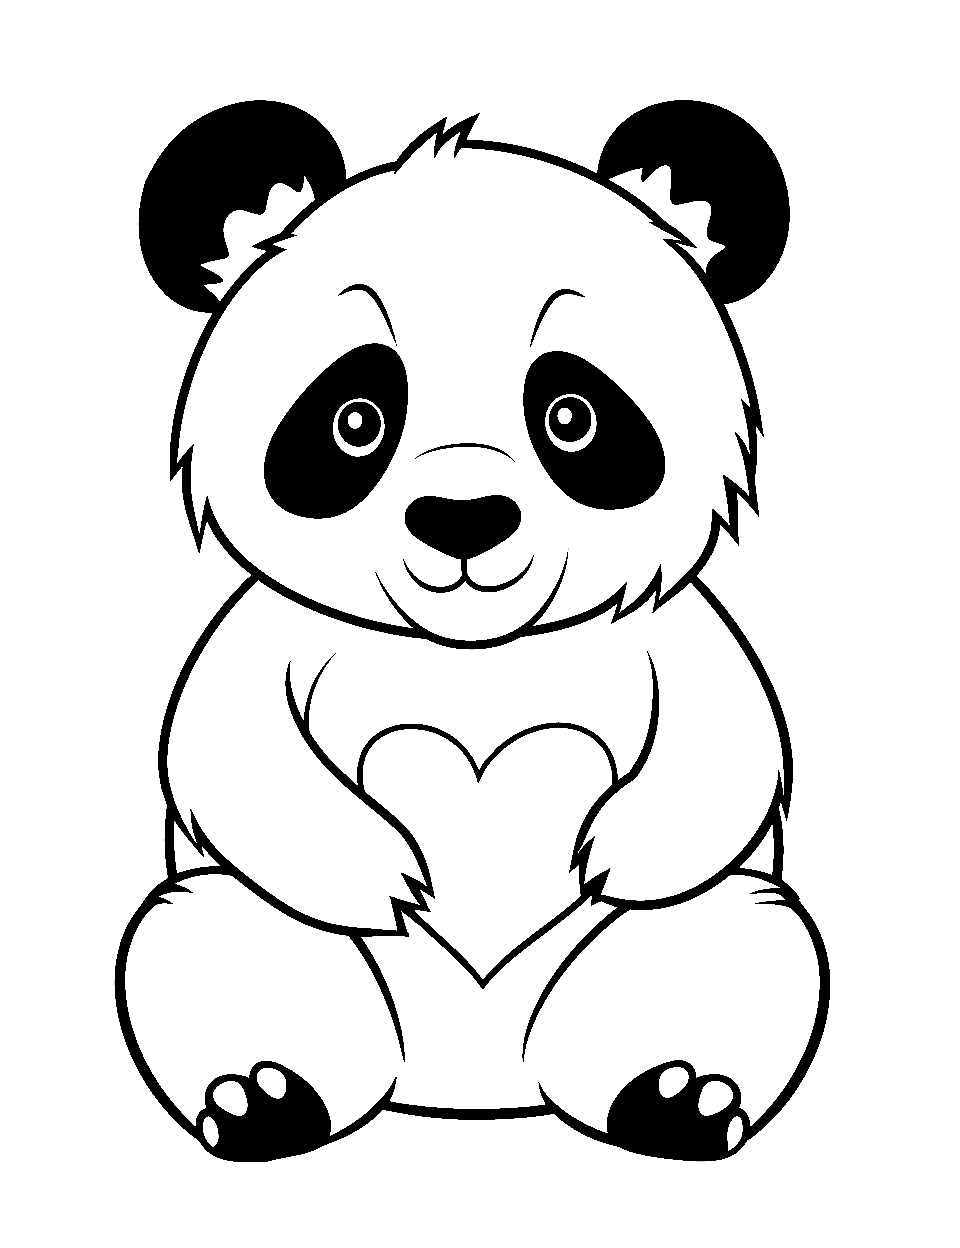 Panda Bear with a Heart Coloring Page - A loveable panda bear holding a big heart in its paws, sharing love.